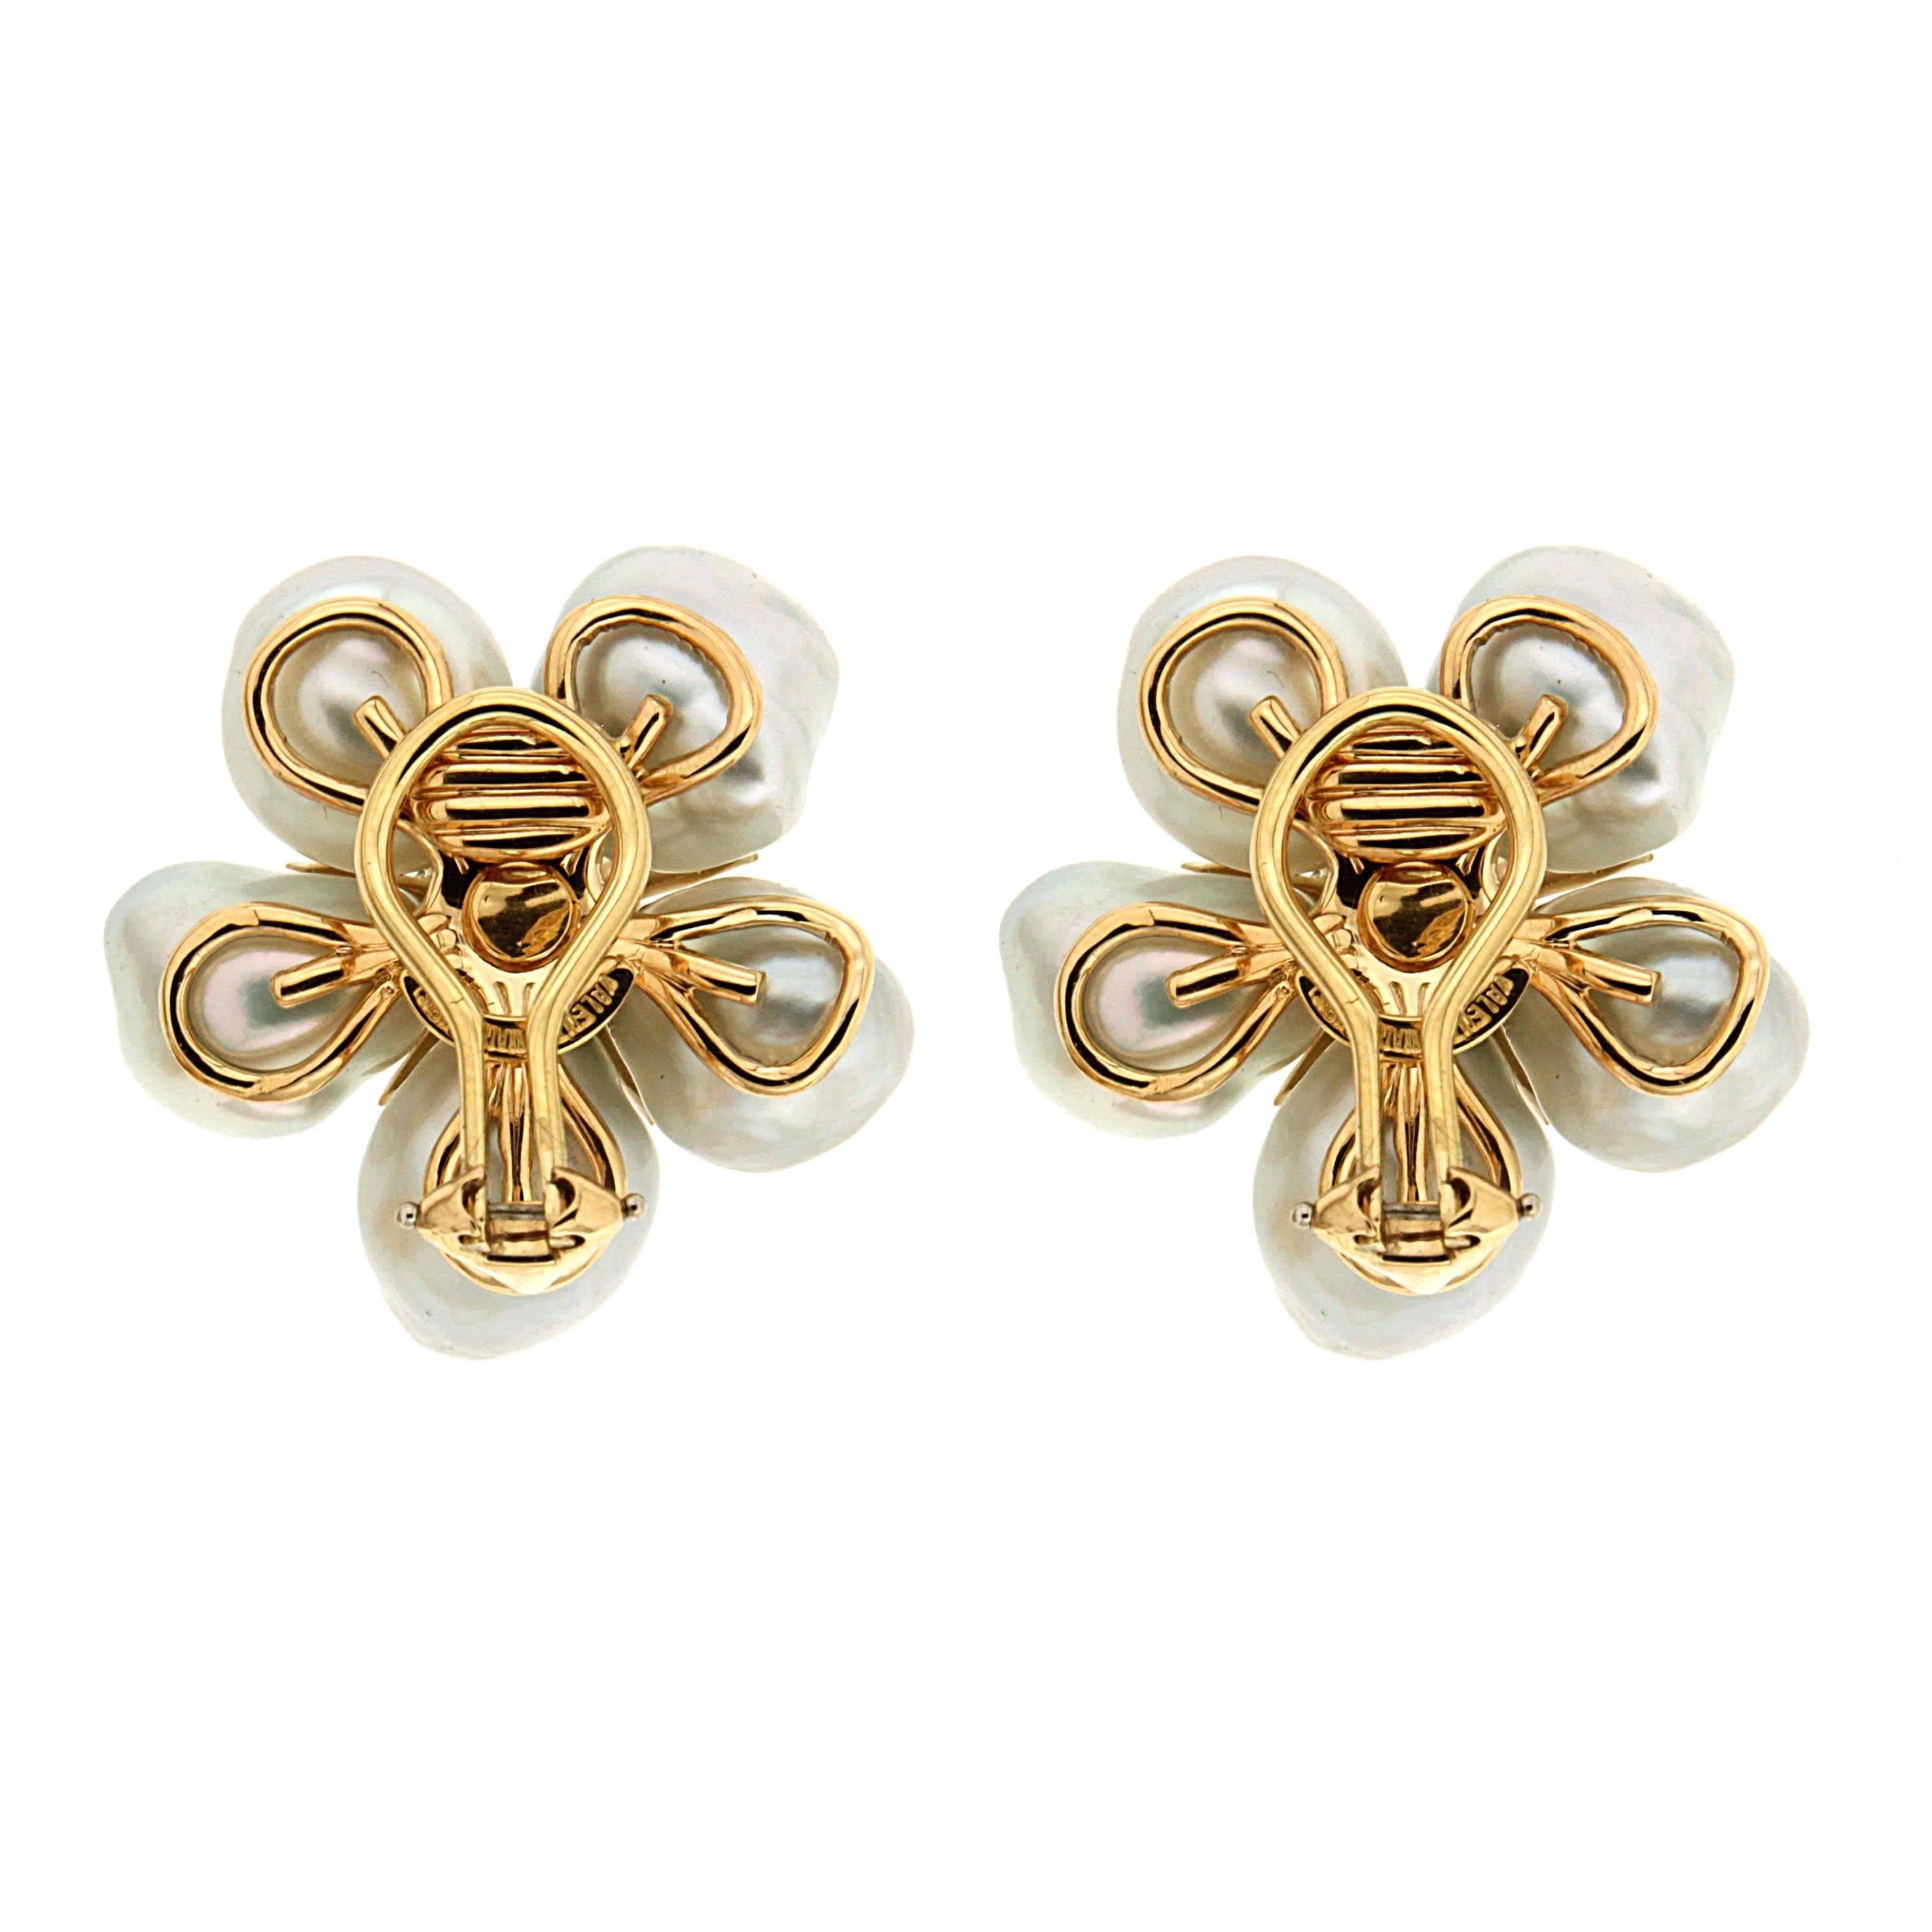 These earrings sparkle in an enchanting design inspired by nature's captivating flower. They are made in 18kt yellow gold, with white keshi pearls cluster and diamonds in the center, they are finished with clip backs. This delicate design marries